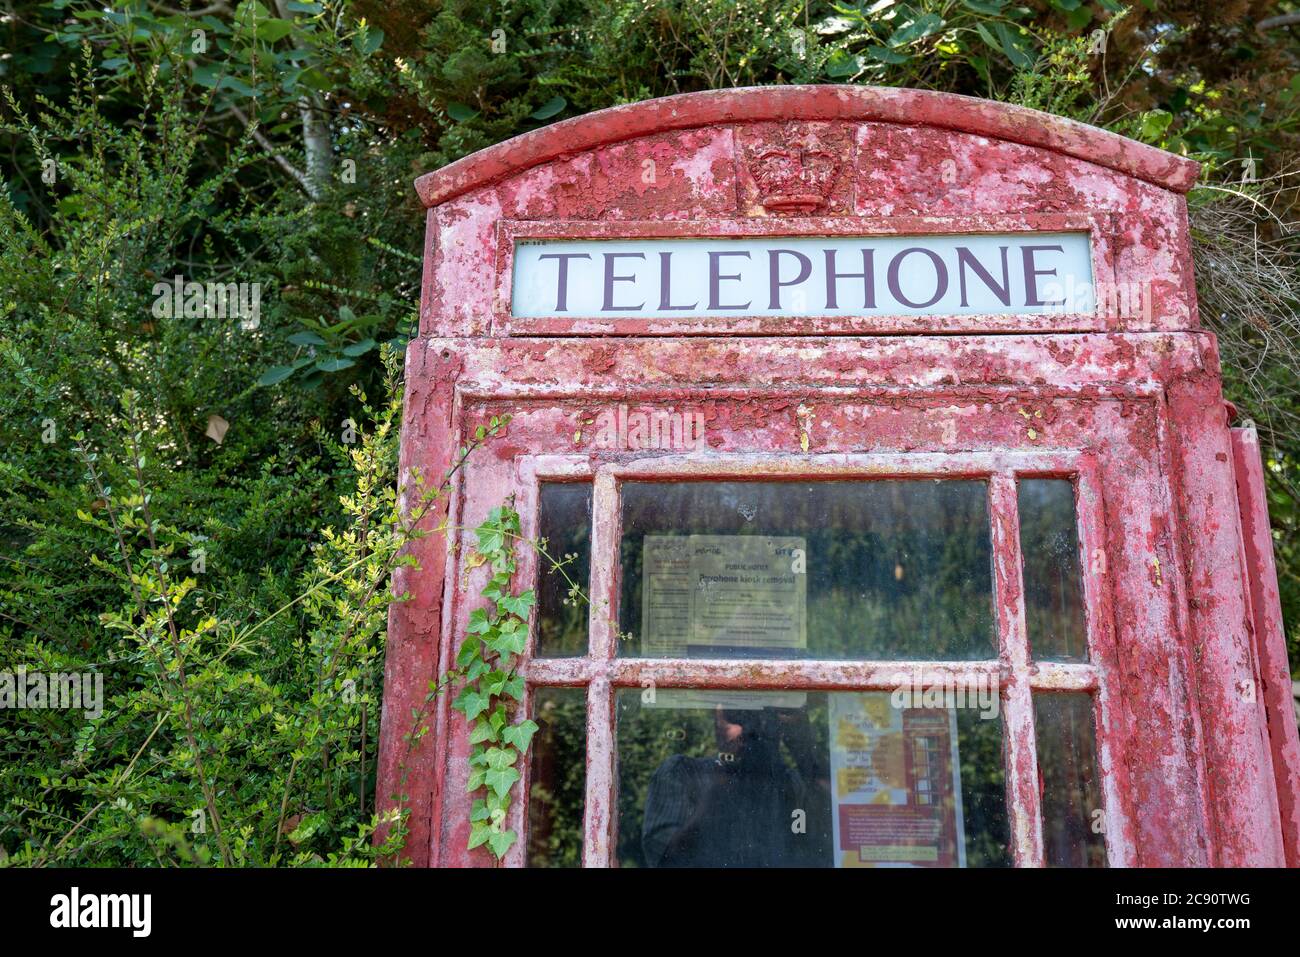 A redundant payphone in rural England Stock Photo